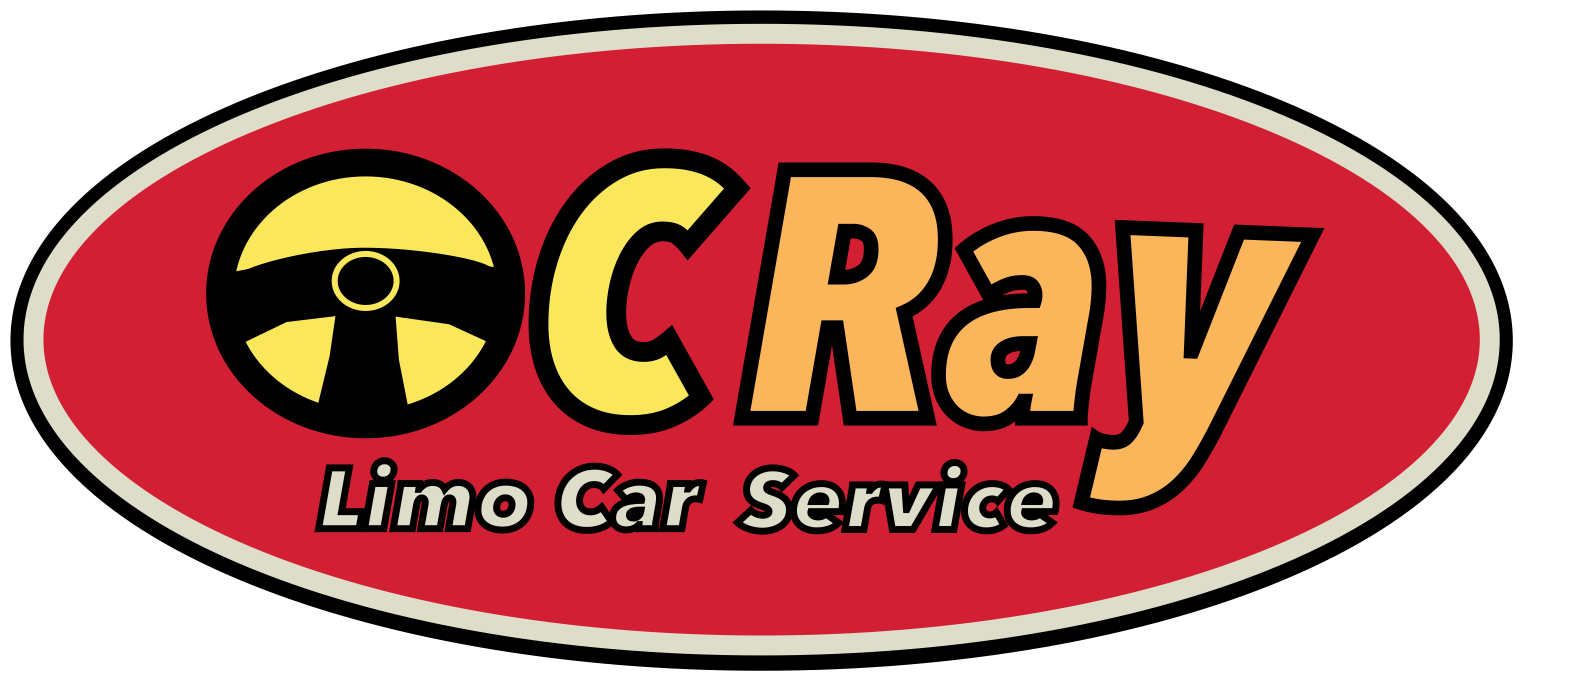 Welcome to OC Ray Limo Car Service